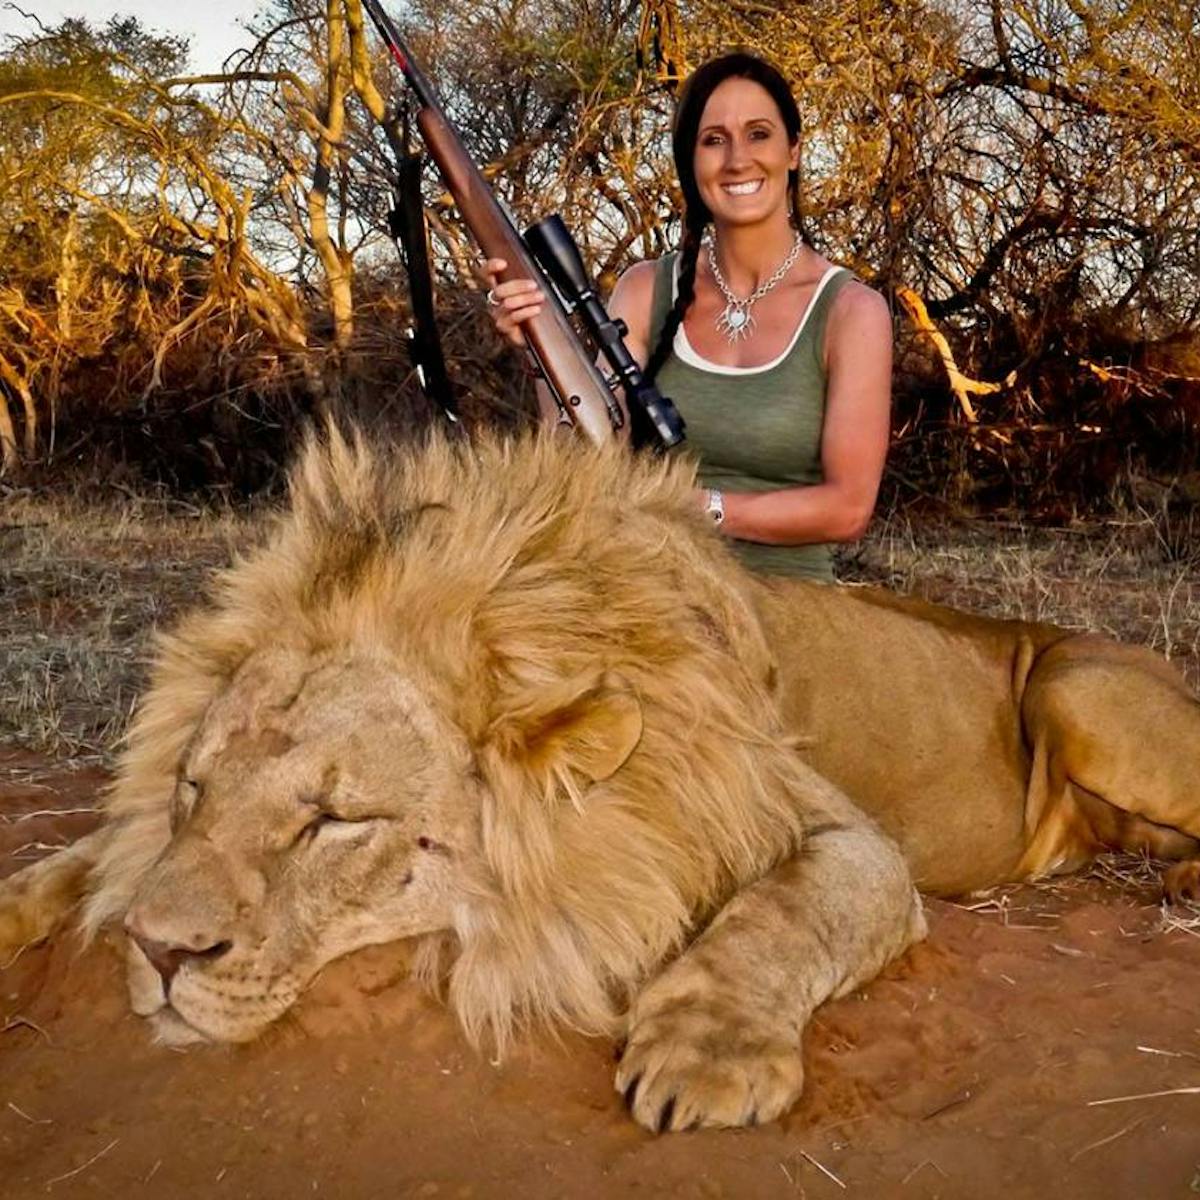 Trophy hunting is not poaching and can help conserve wildlife